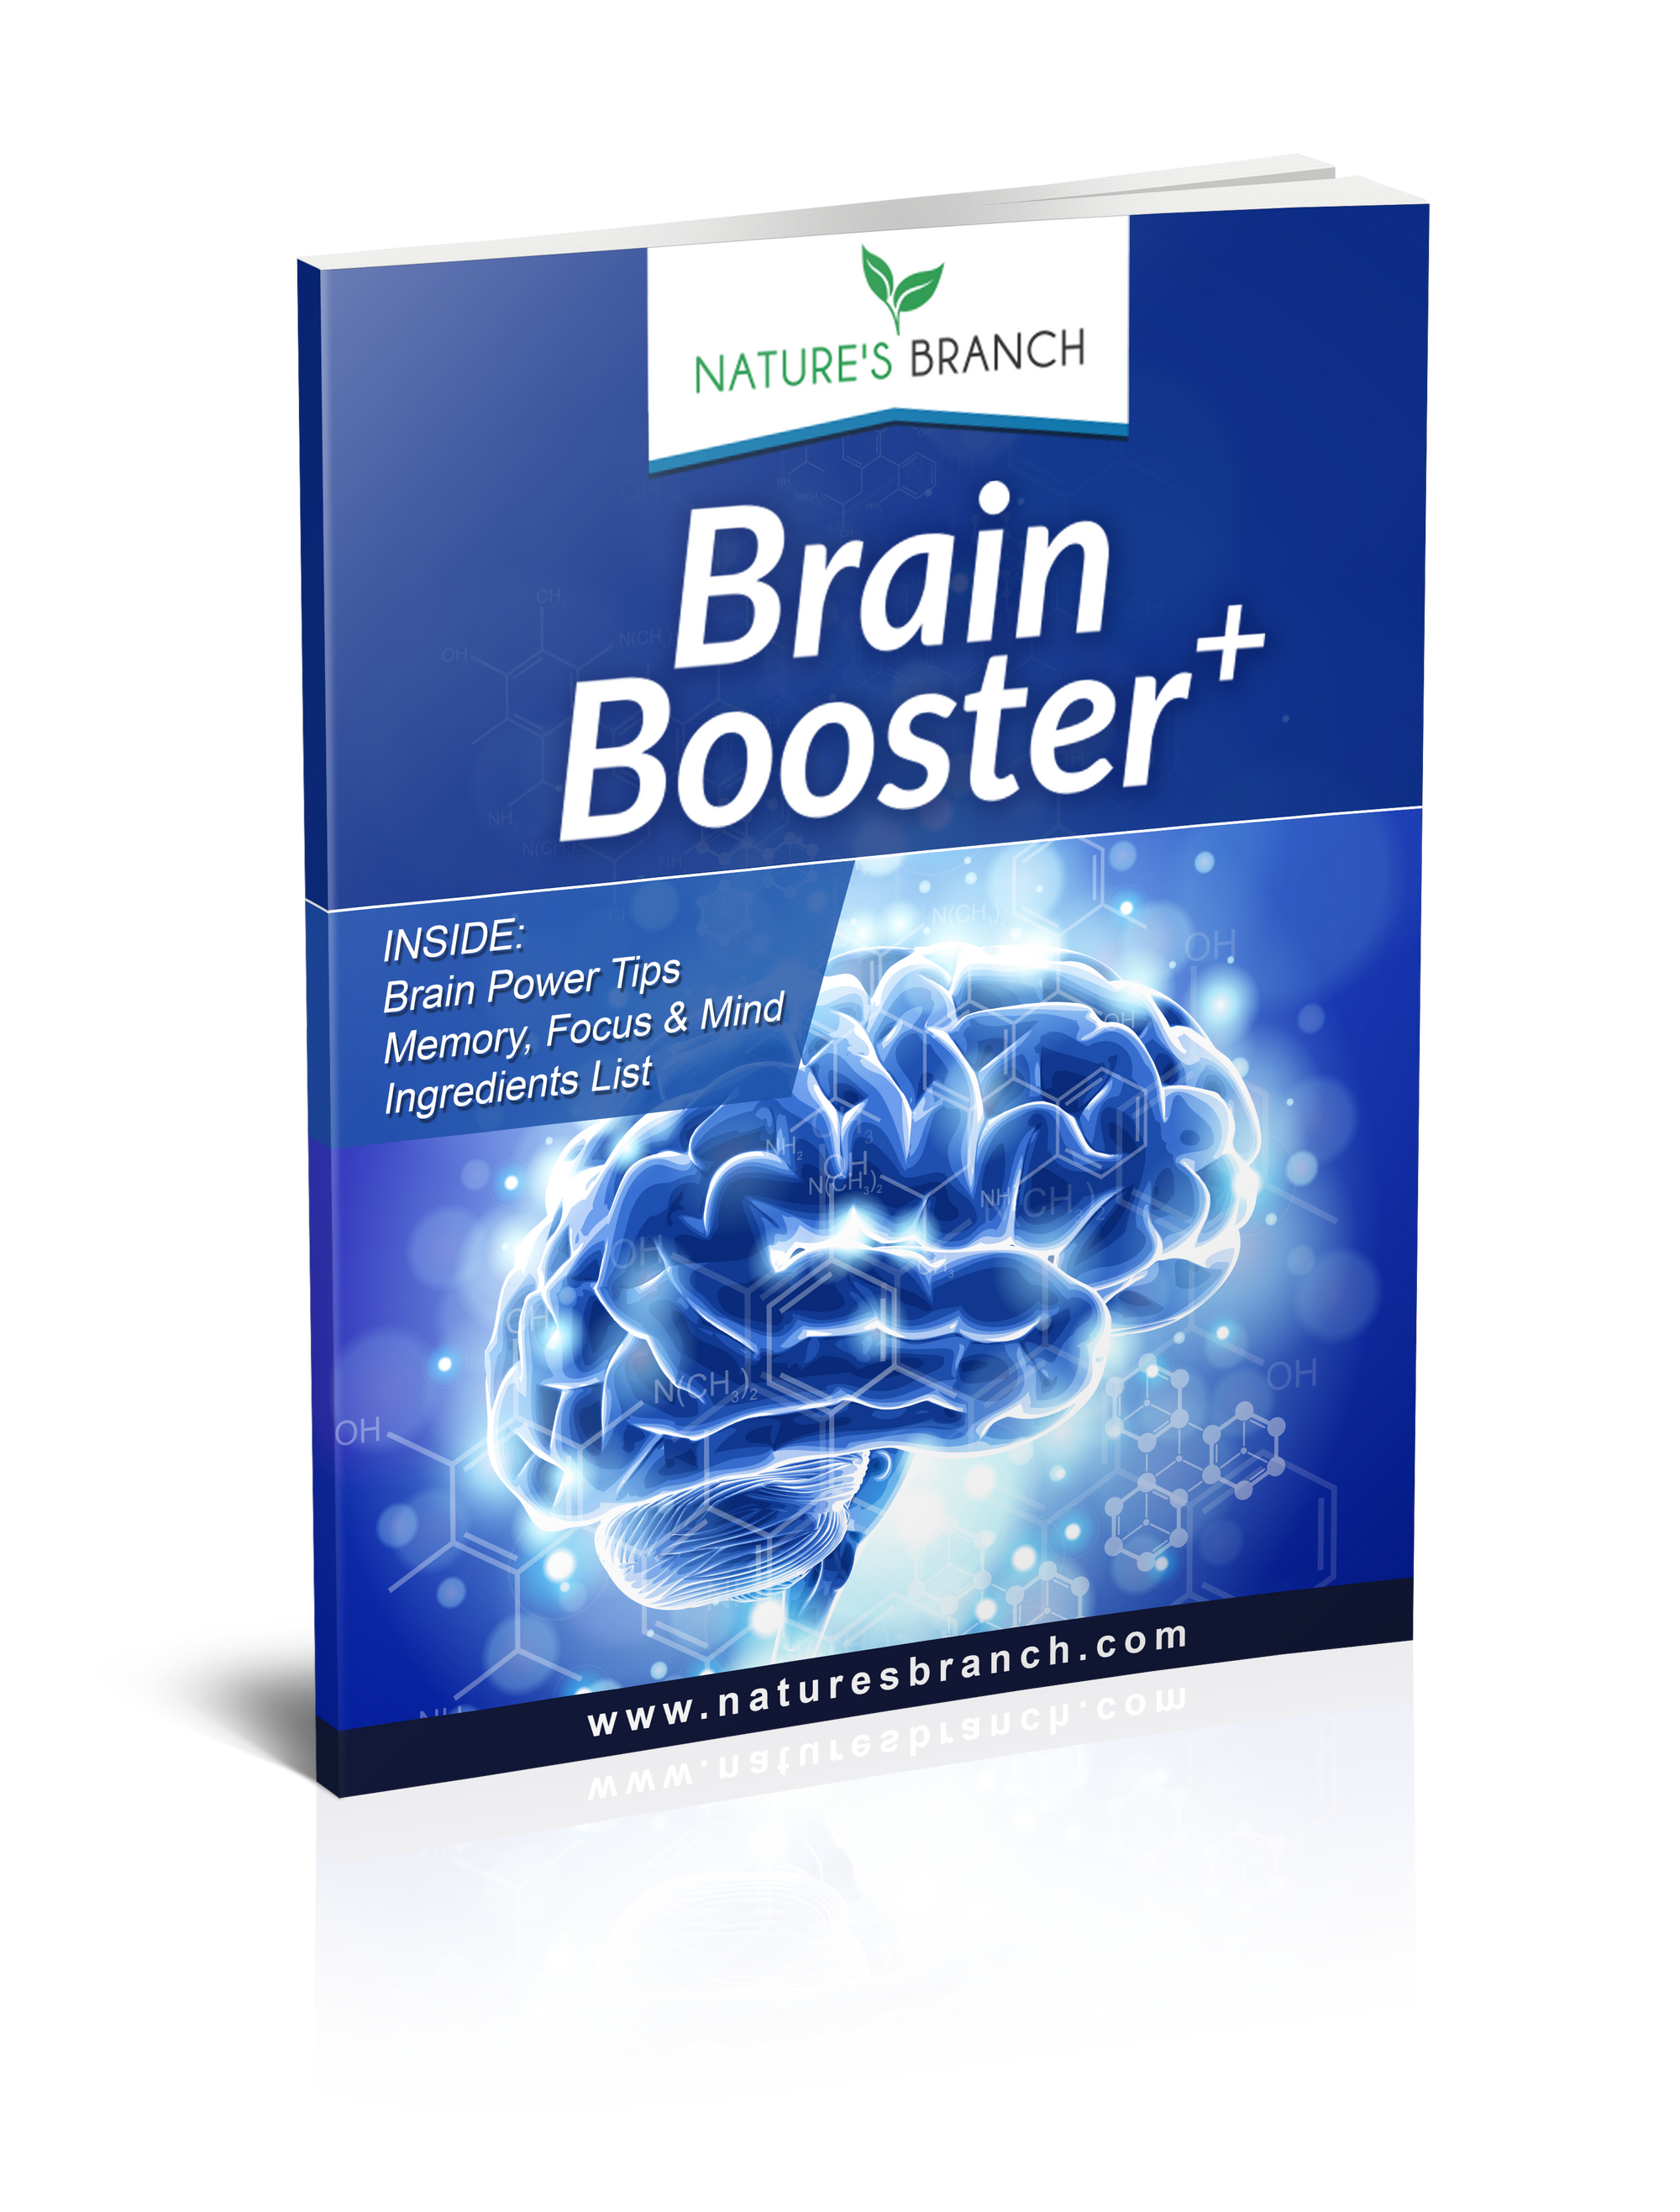 Nature's Branch Brain Booster Training eBook for Focus Memory and Clarity exercises